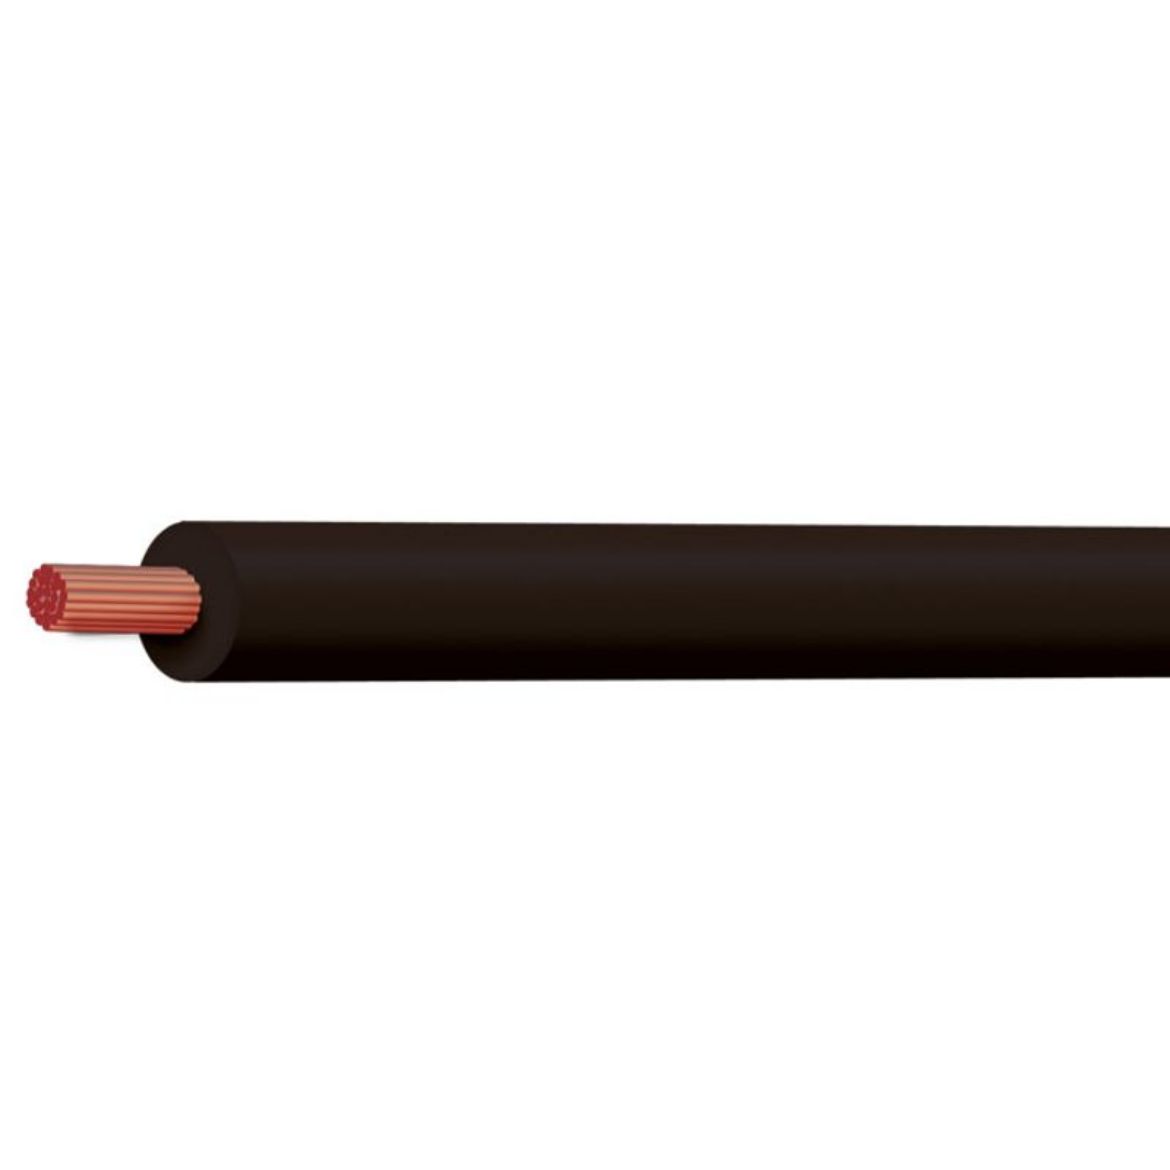 Picture of TYCAB SINGLE CORE CABLE BATTERY 00 B&S CROSS SECT 64MM SQ RATING 370A BLACK CUT - PER METER